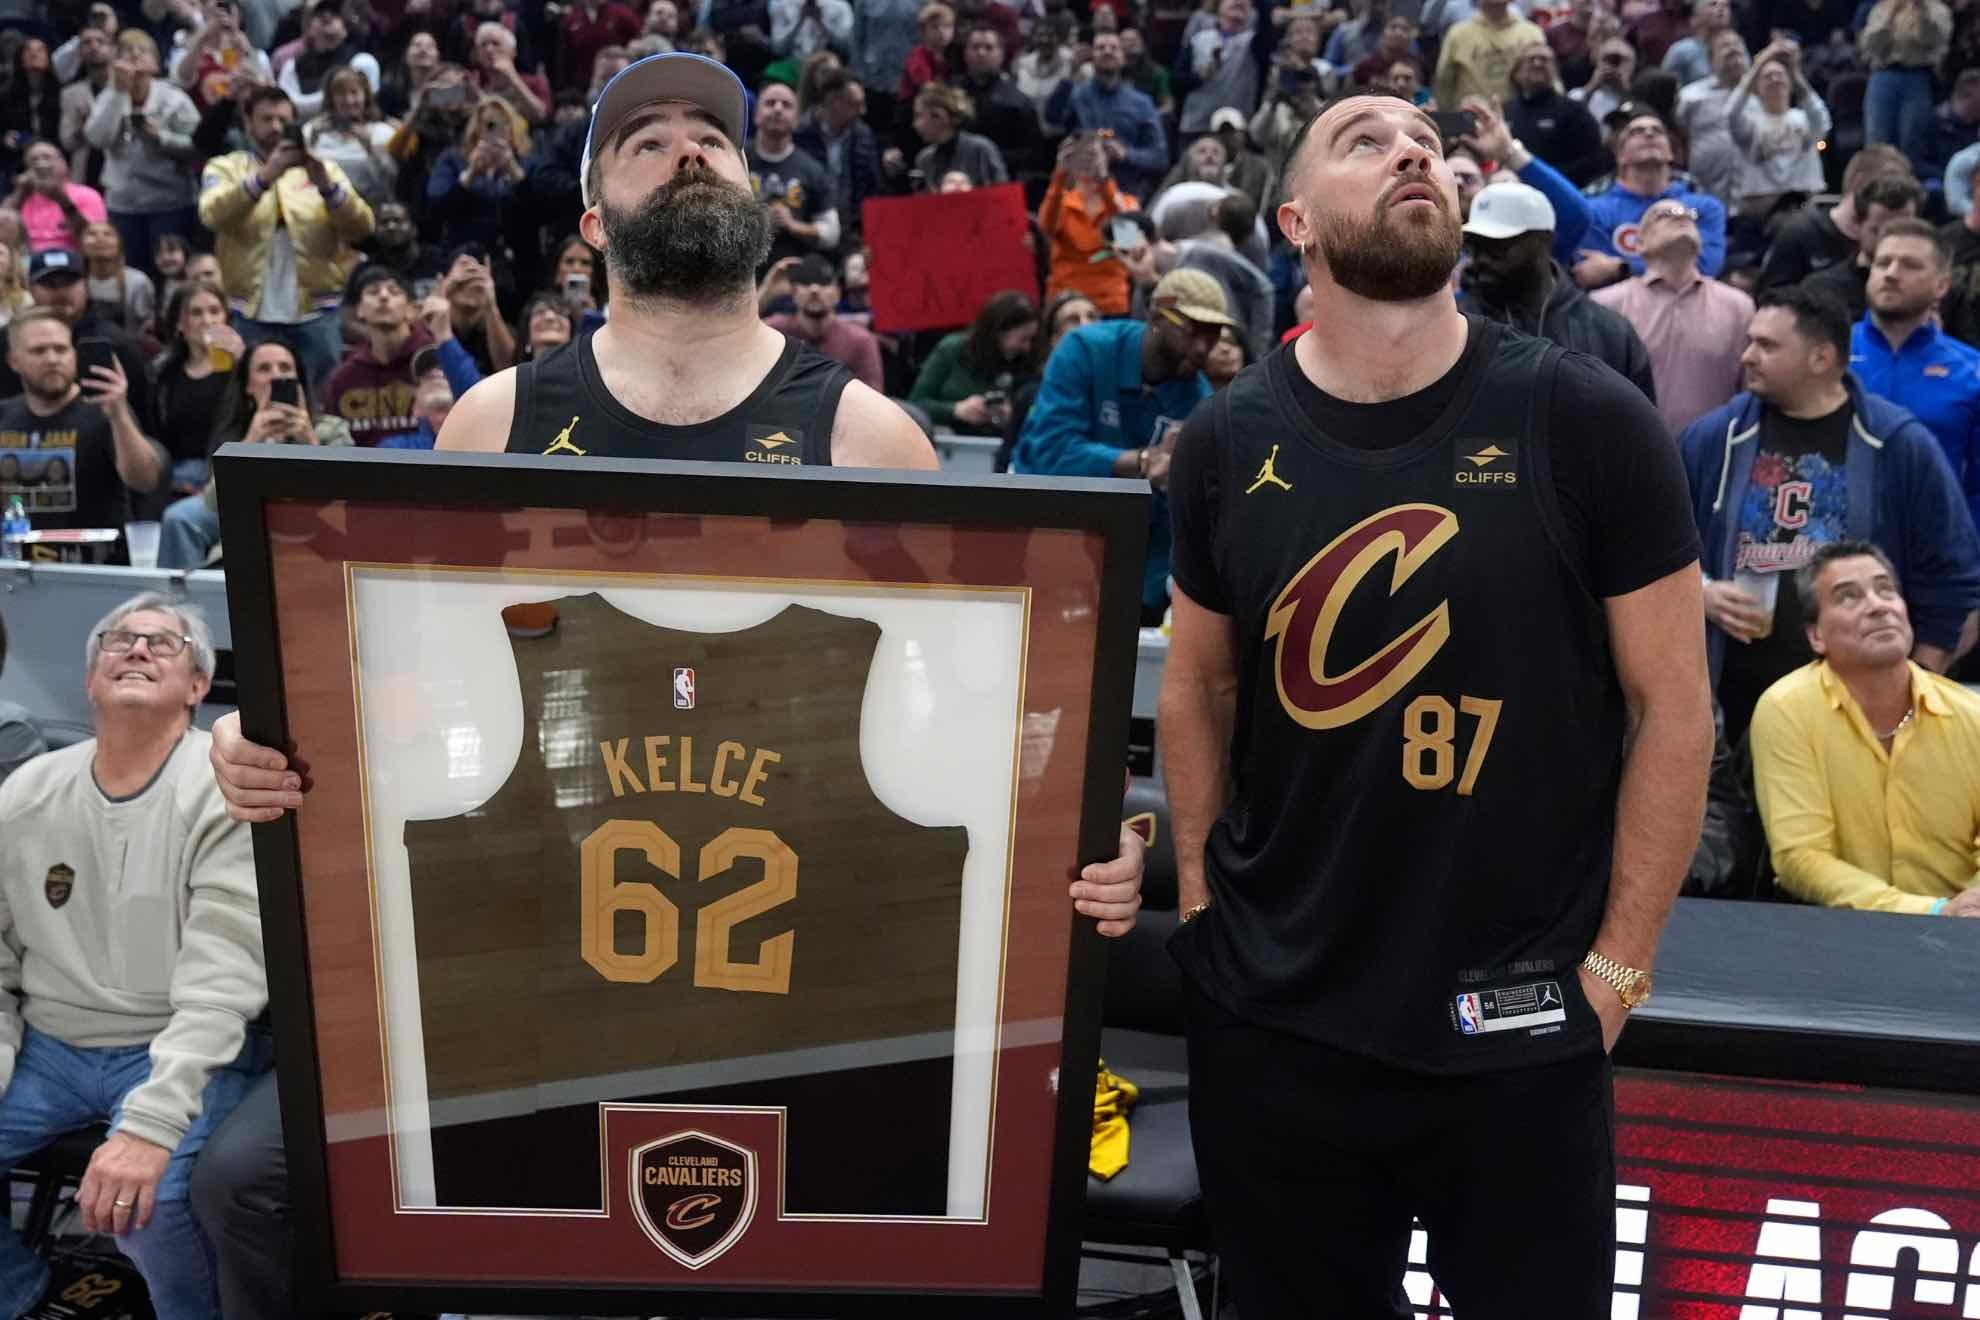 Locals Jason and Travis Kelce were honored at the Cleveland Cavaliers game